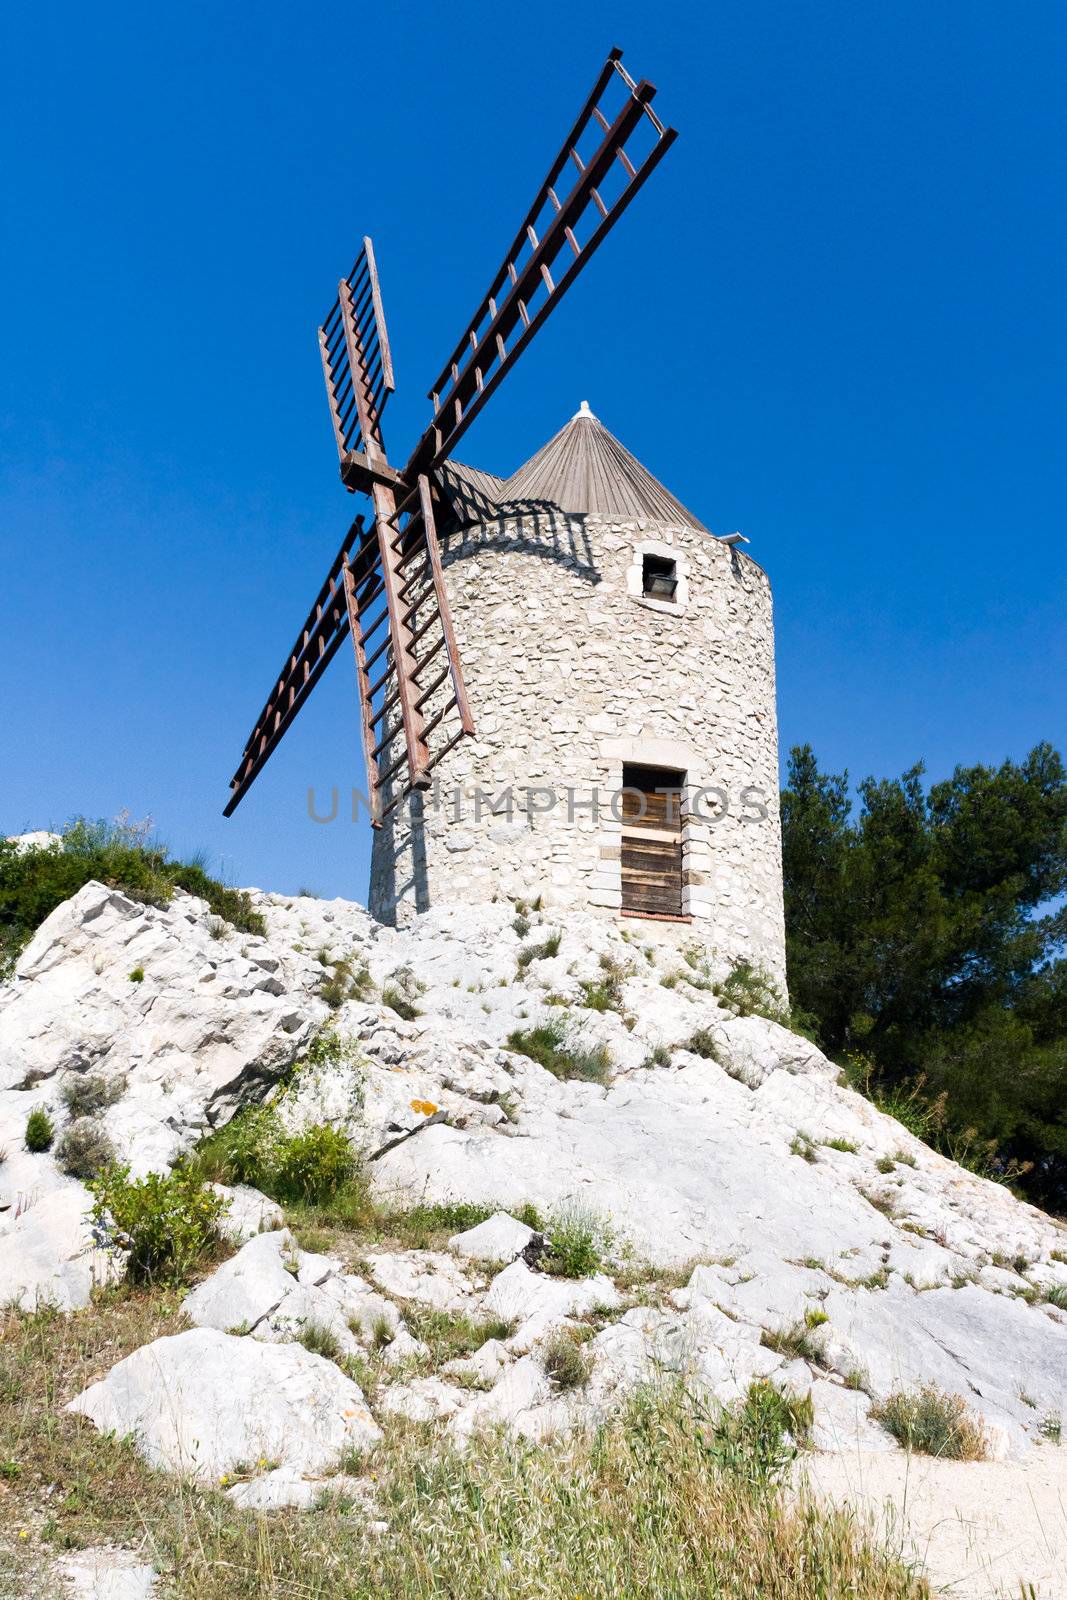 Windmill of Provence in Marseille, France